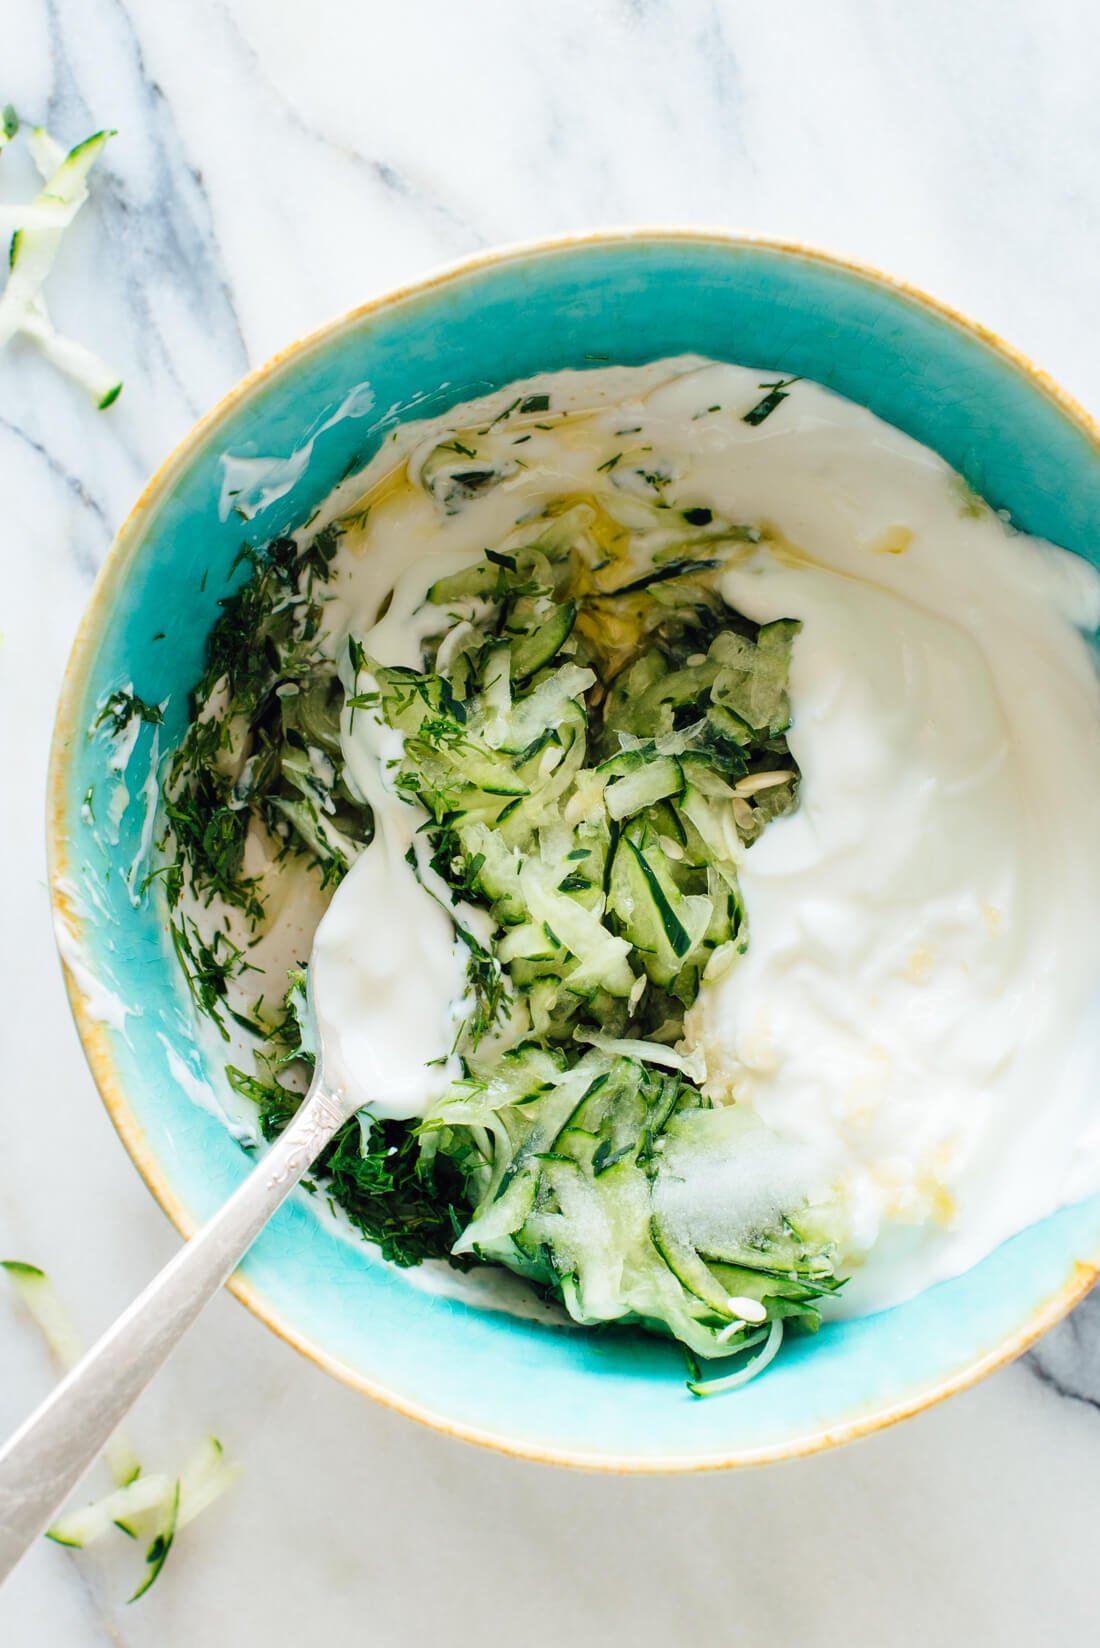 Traditional Greek Tzatziki sauce made with cucumber, yogurt, olive oil, lemon juice, garlic, and fresh dill and mint!